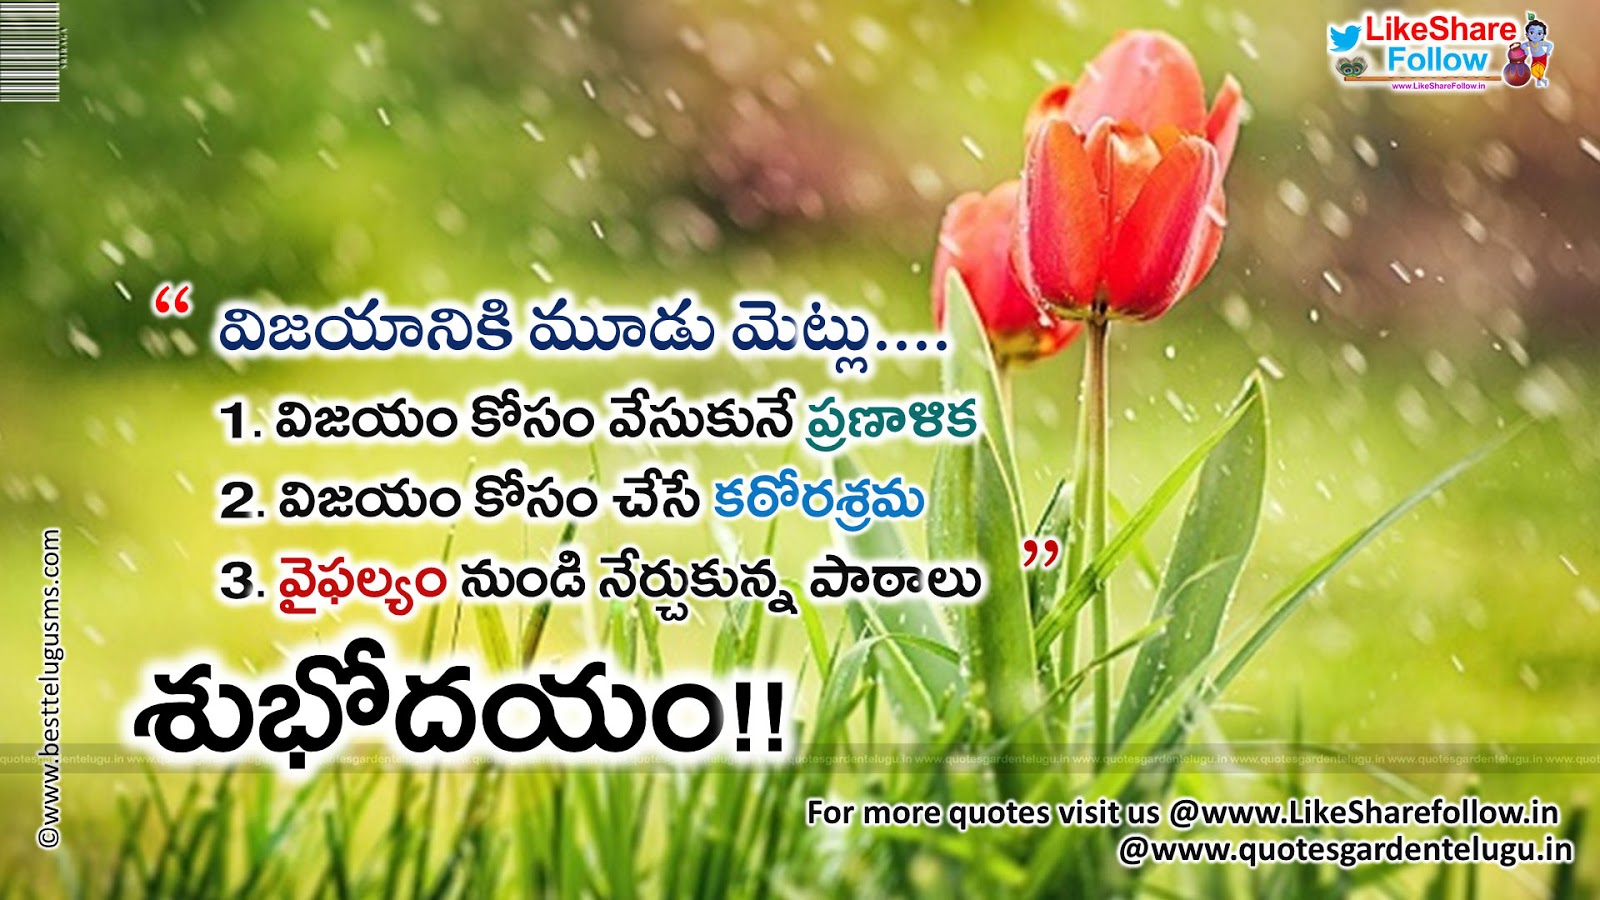 Best good morning quotes in telugu messages wallpapers | Like Share Follow